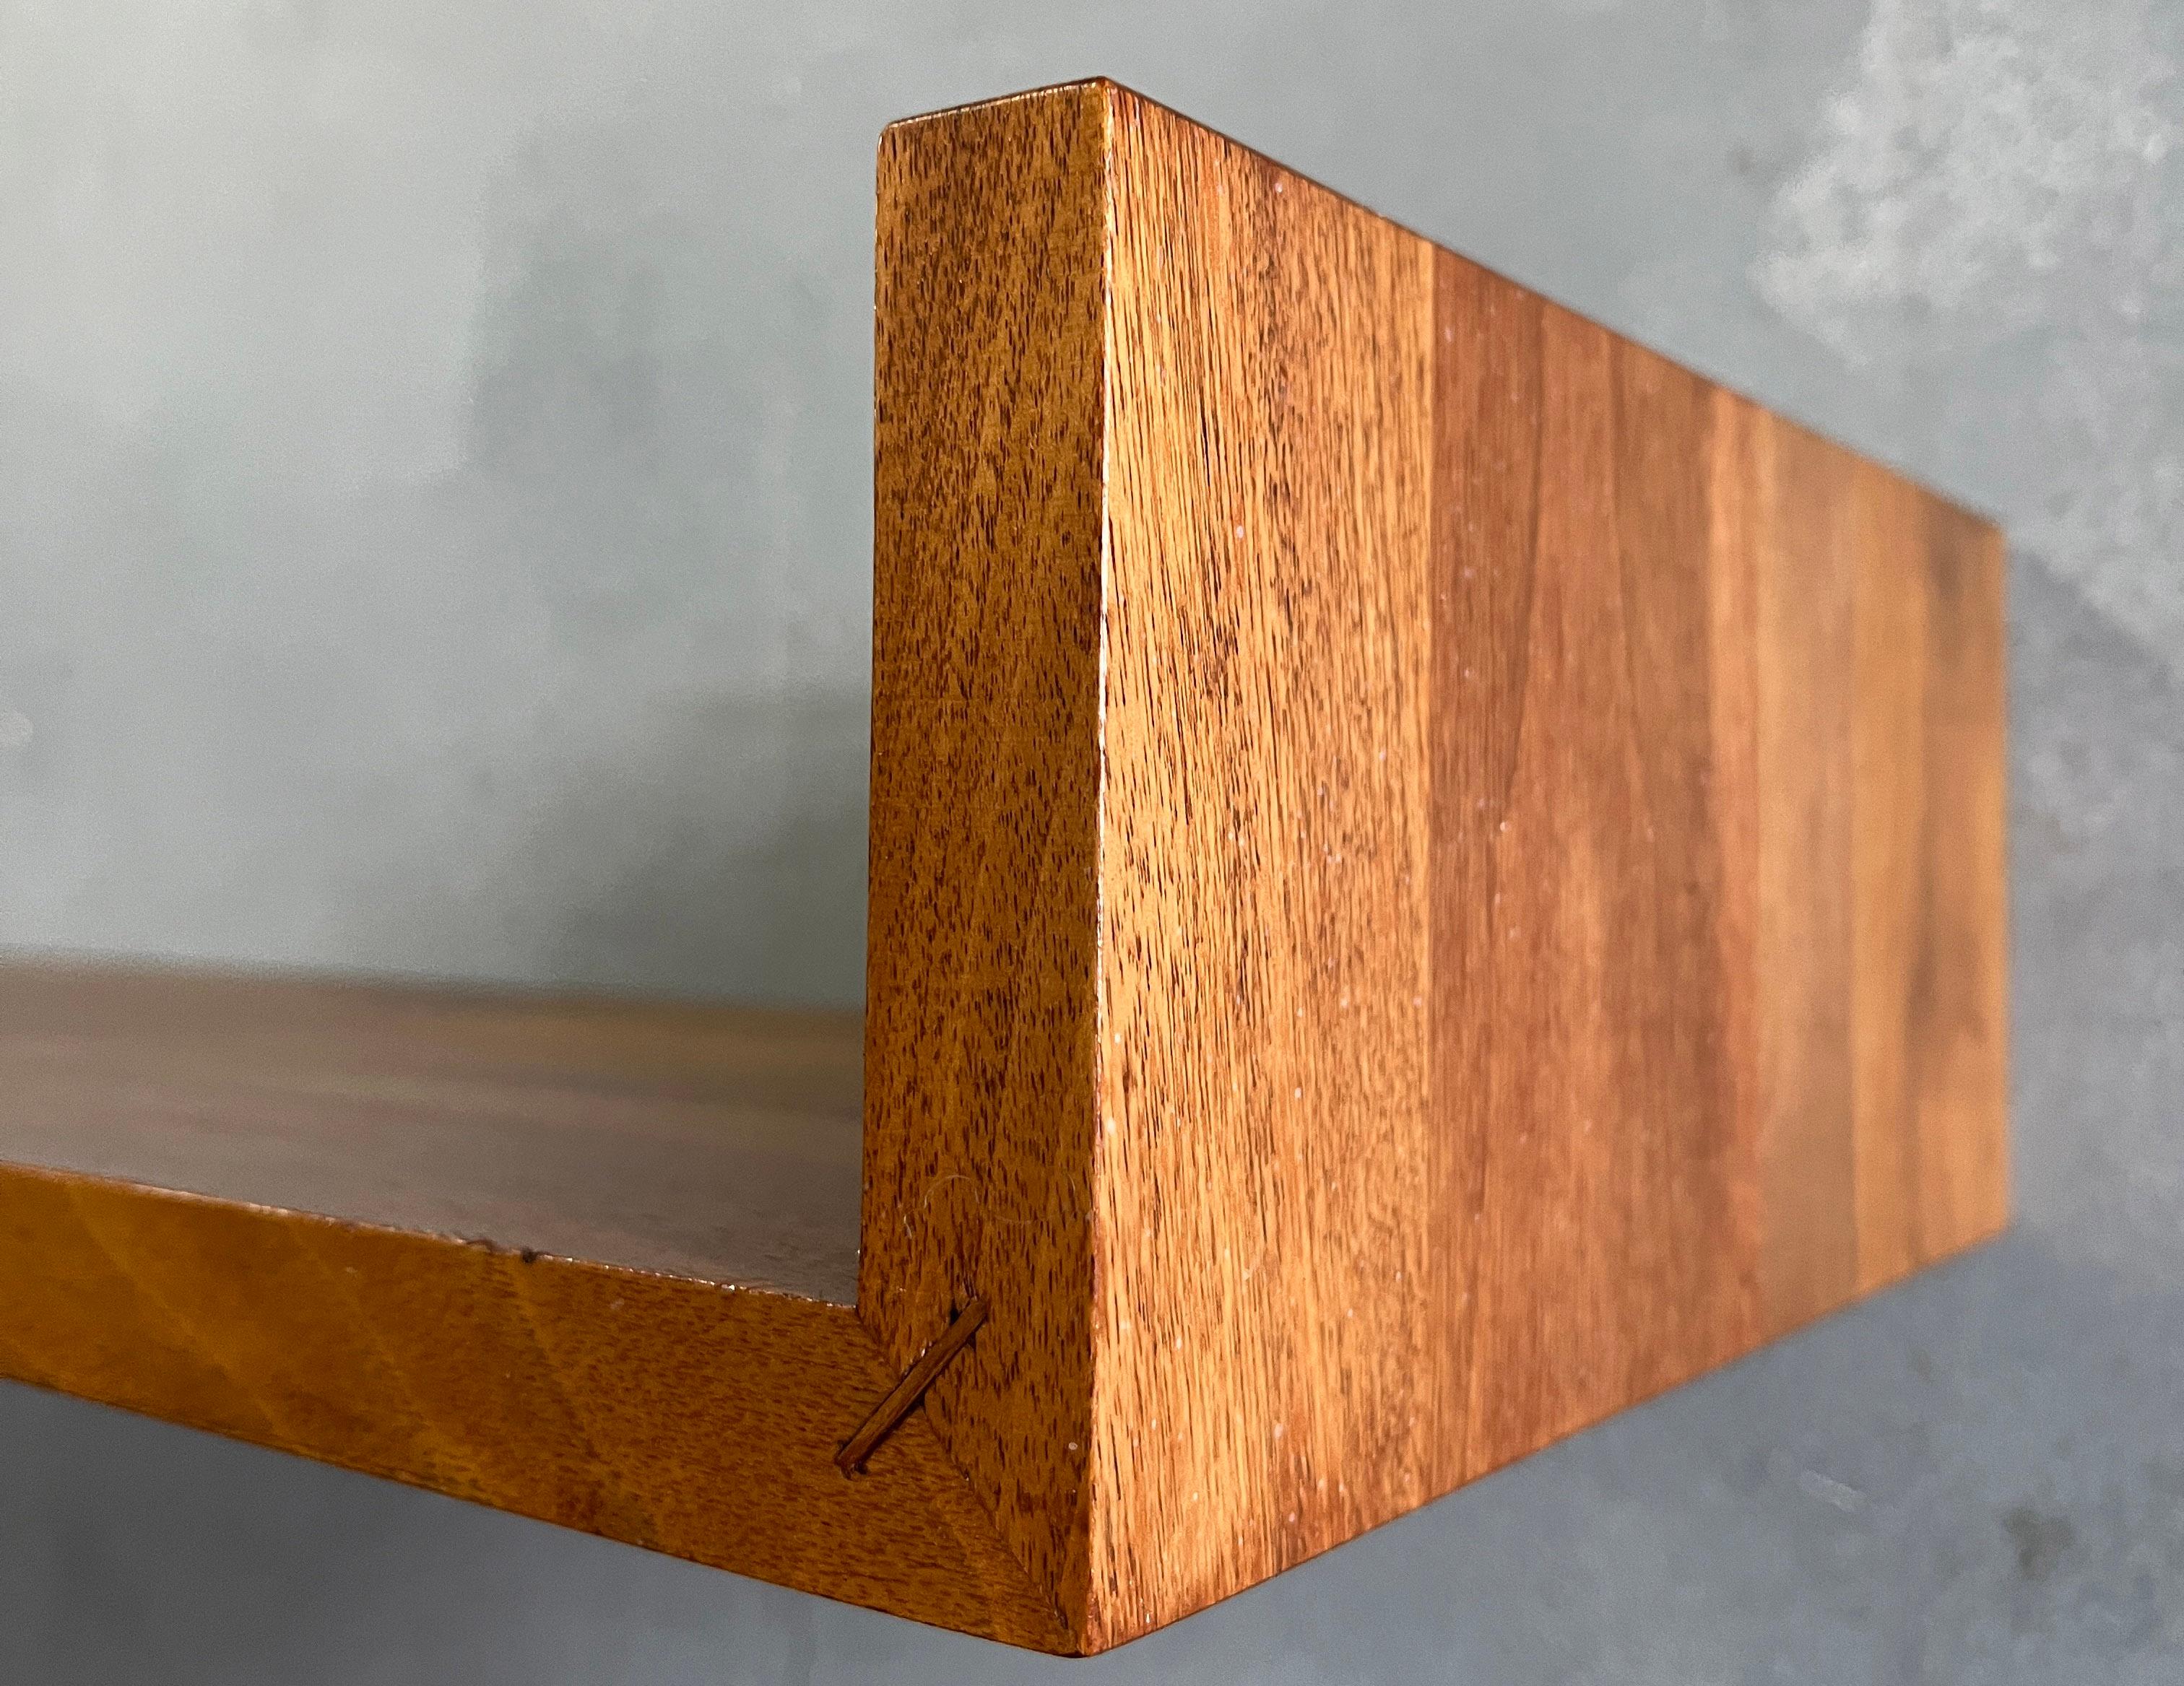 For your consideration is this rare and beautiful walnut floating wall shelf designed by Mel Smilow. 
They connect to the wall with simple key hole hangers. The symmetry of the design help support the shelf against the wall firmly and strong. No